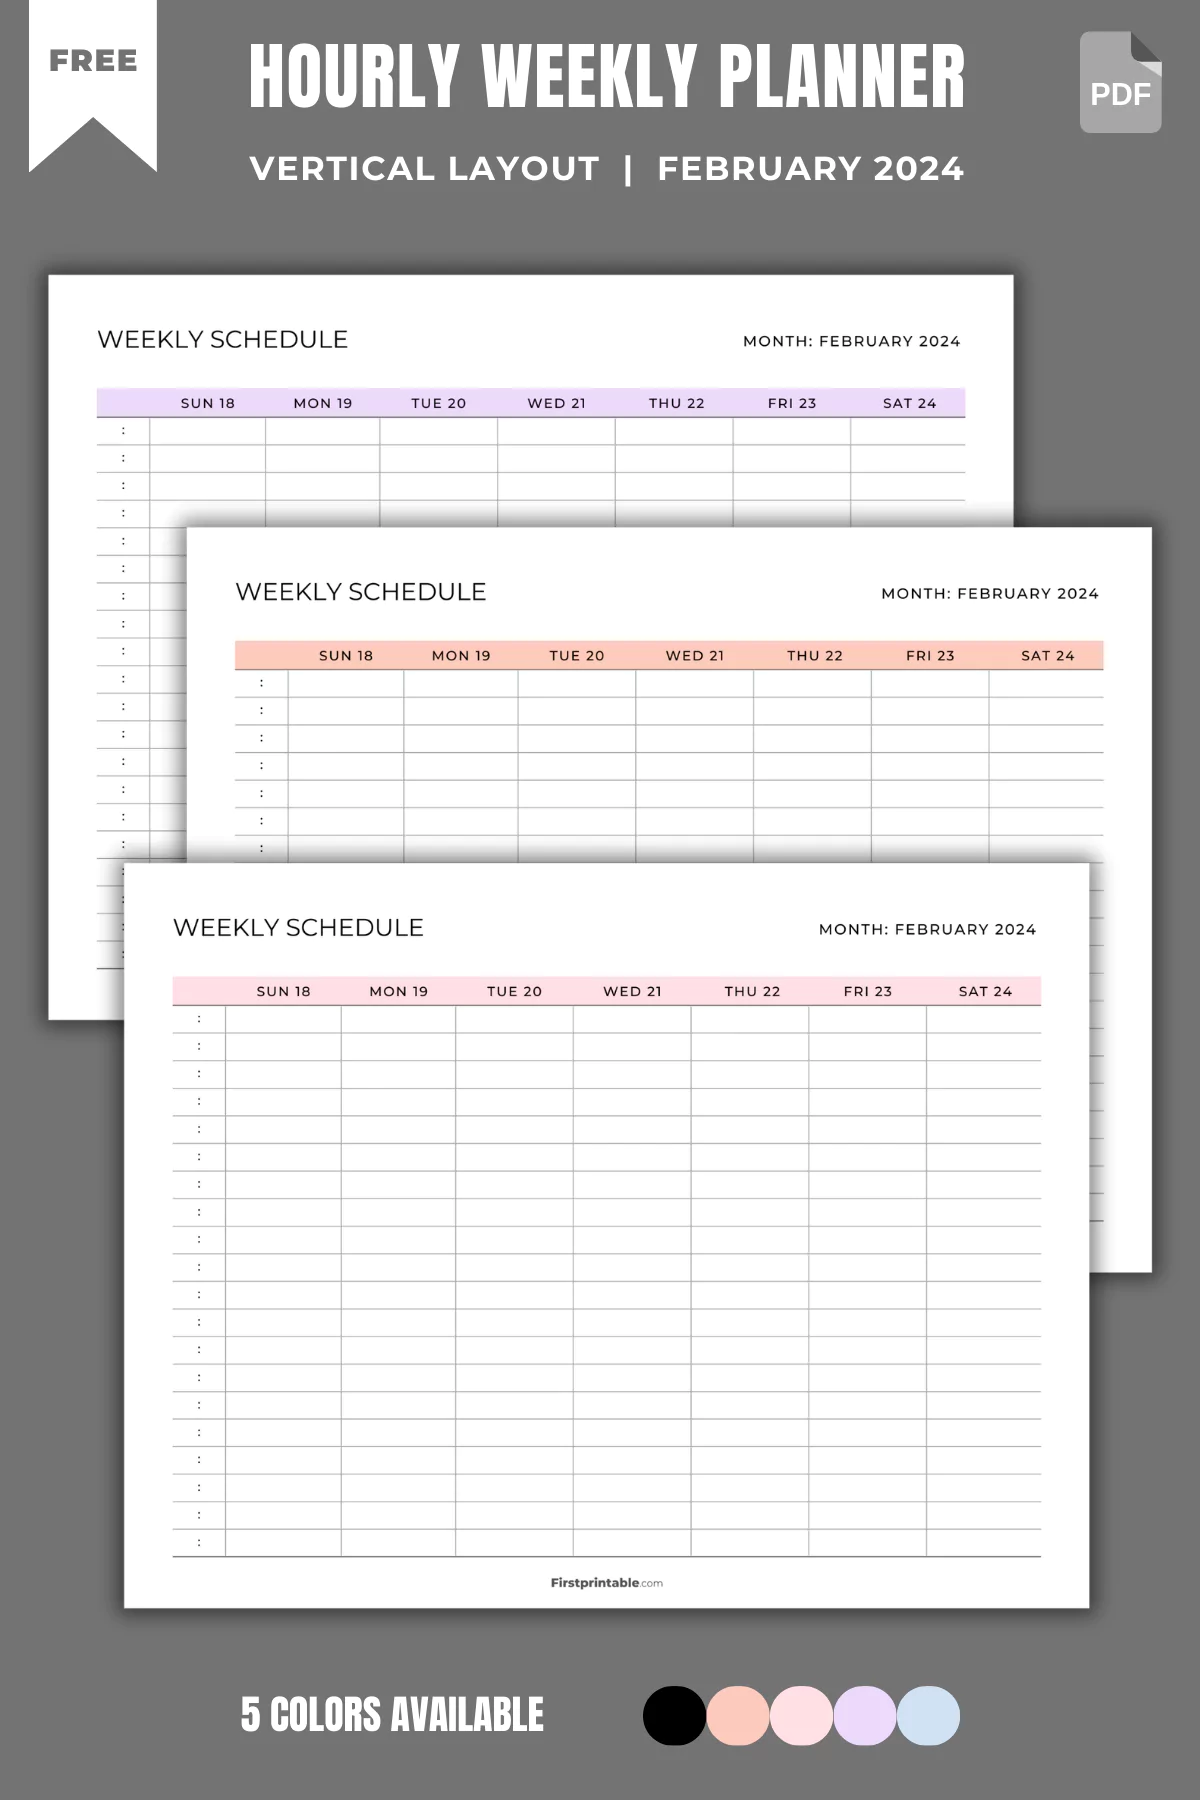 Printable Weekly Schedule Templates – February 2024